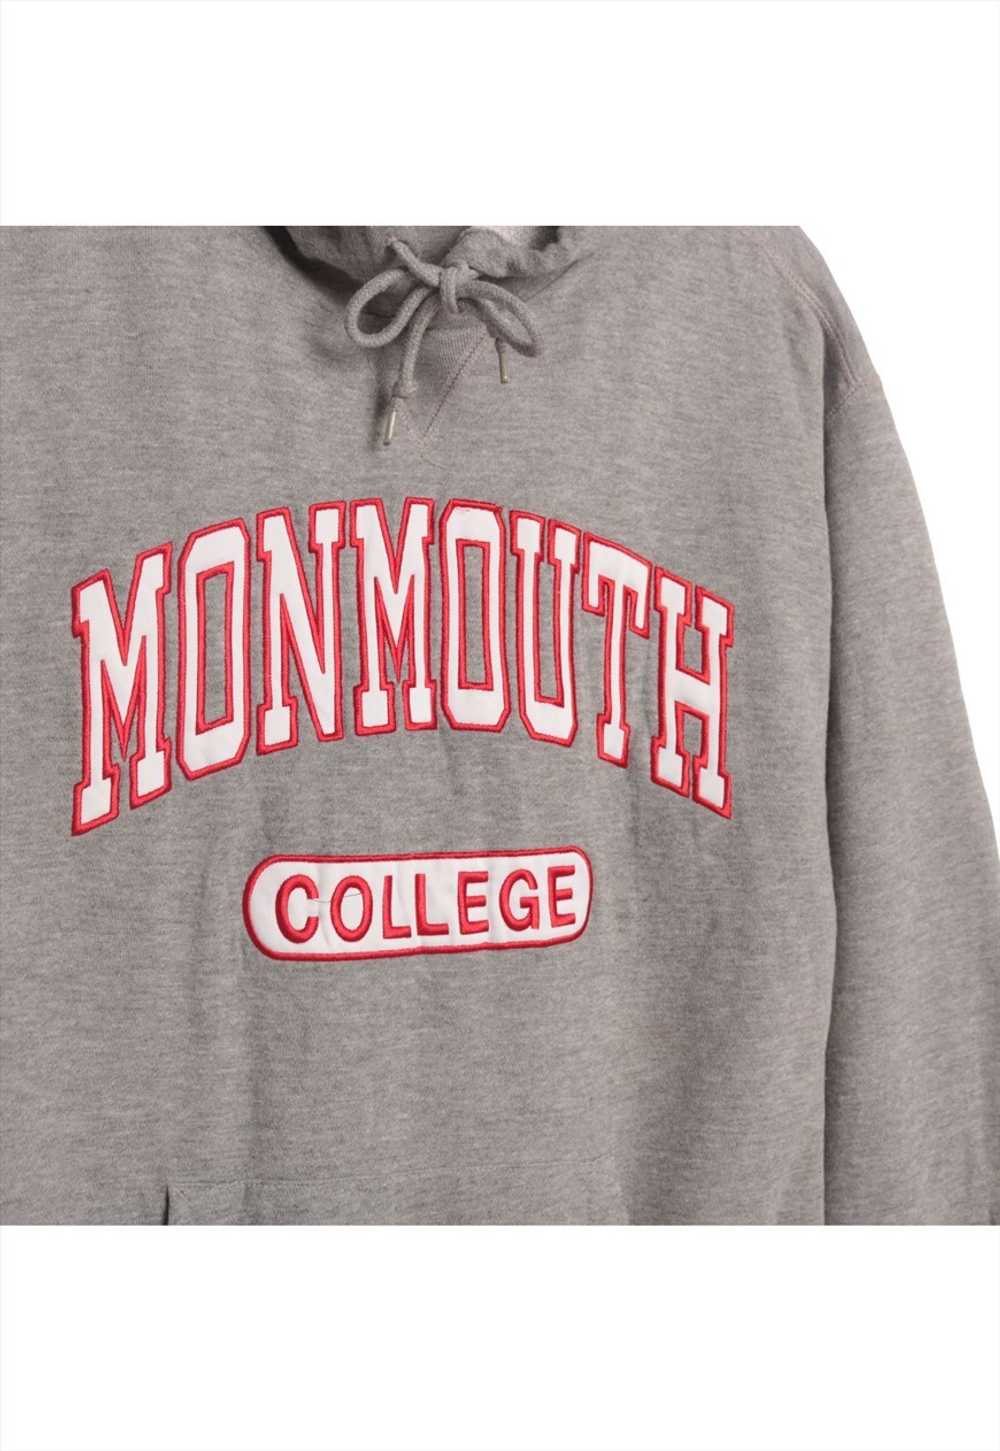 Vintage 90's Holloway Hoodie Embroidered College - image 3